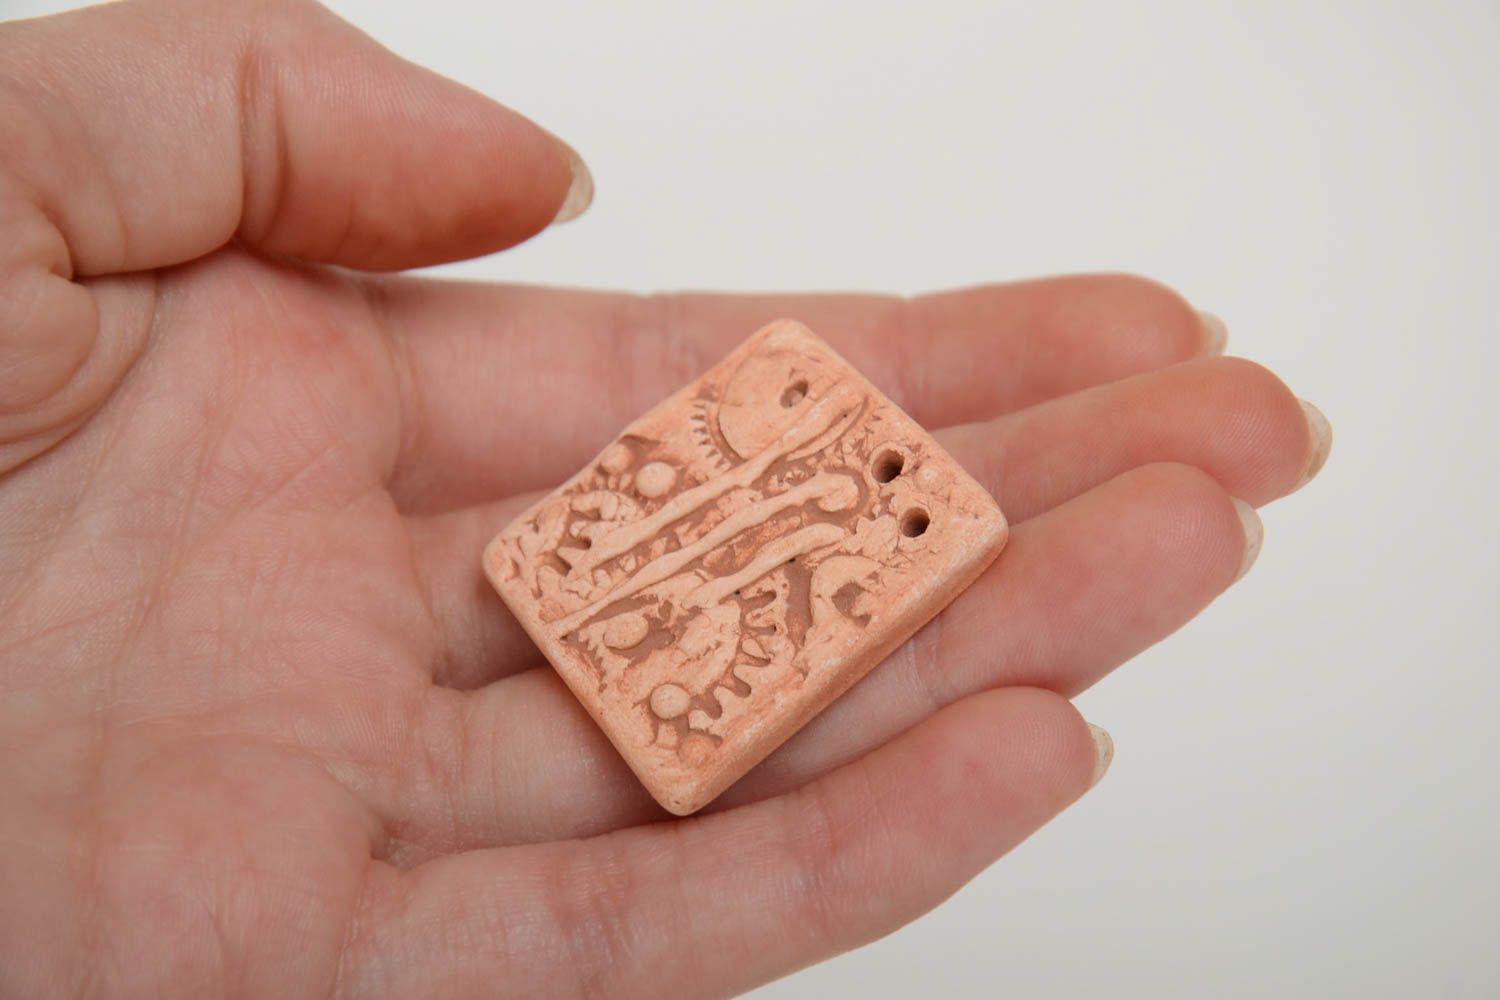 Square flat ceramic jewelry finding for painting and necklace or pendant making photo 5